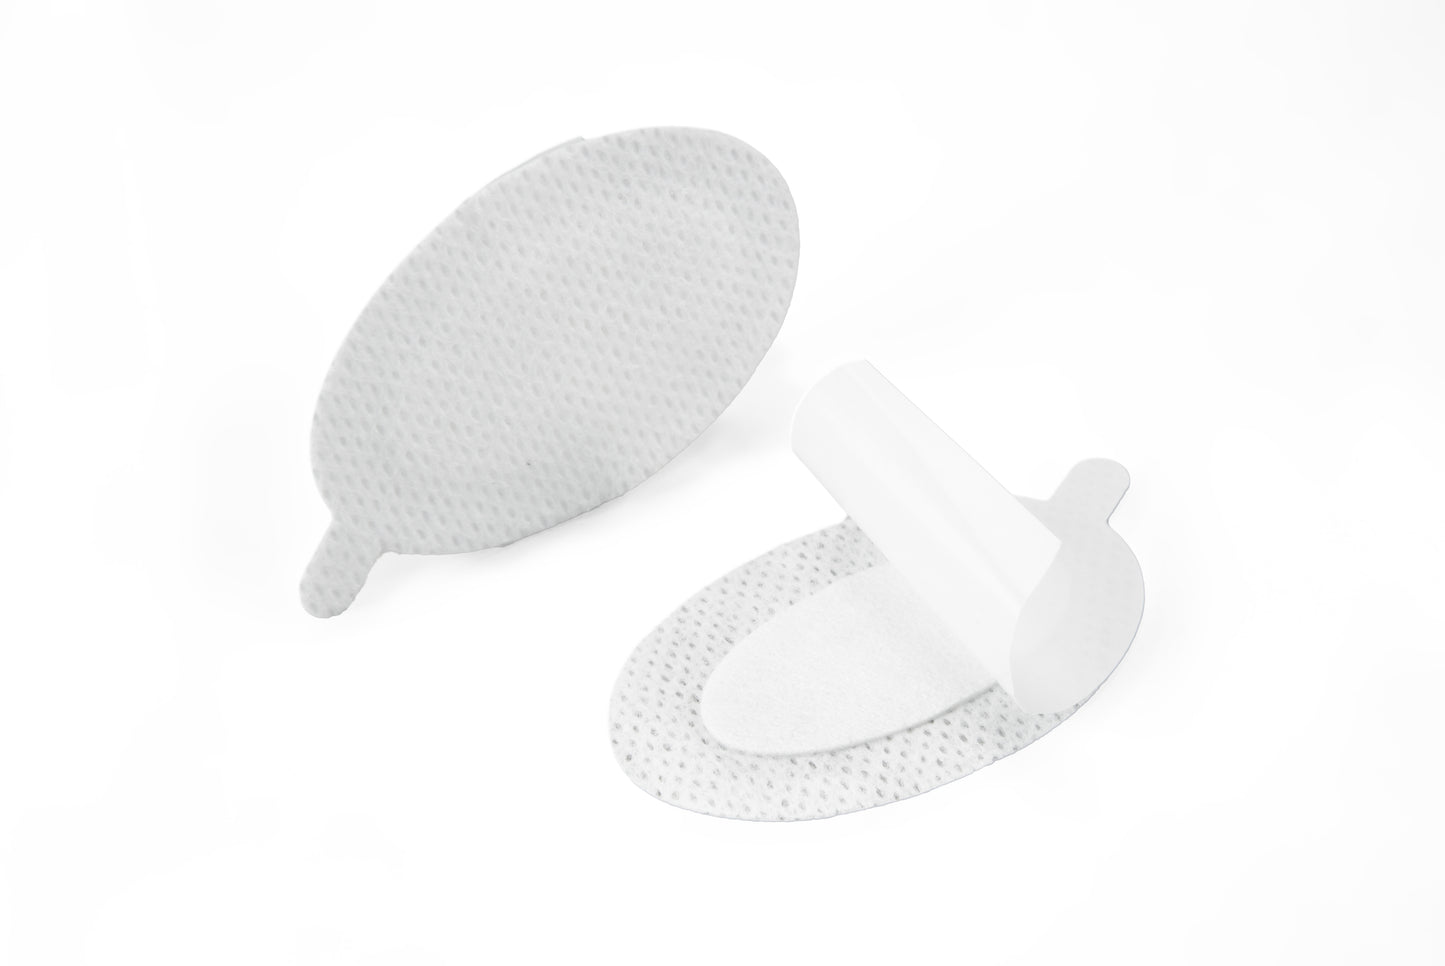 Dermaglow Protective Eye Shield For Facial Procedures (SAMPLE PACK -4 Pair) Free Shipping